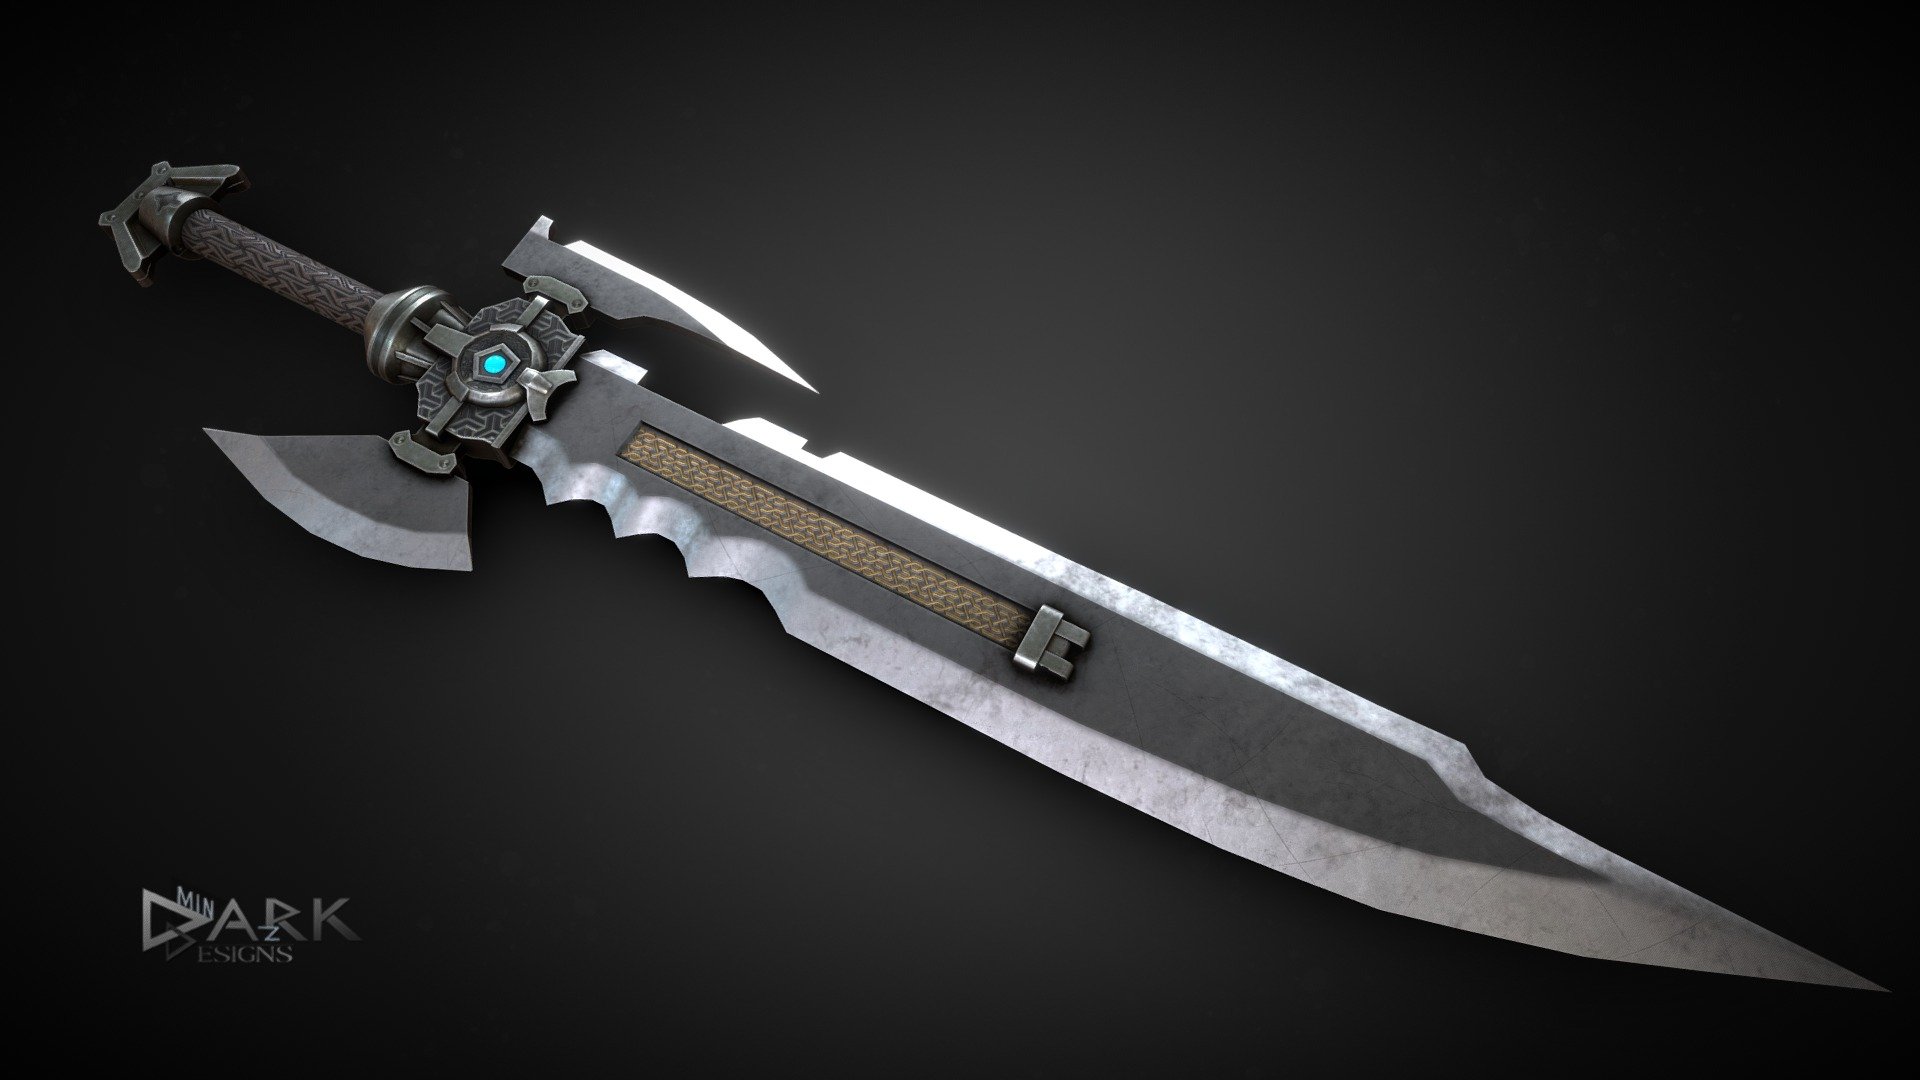 A forged mix between the old Celtic Vikings and Futuristic Fantasy.
Old Ornaments are inscribed into each part of the Sword in memories on the old Gods that once blessed warriors. The Sword itself has 2 extra blades that protect the Wielder of this Blade.

Made with Maya, Substance Painter, 3D Coat - Viking Sci-Fi Fantasy Blade - Buy Royalty Free 3D model by dark-minaz 3d model